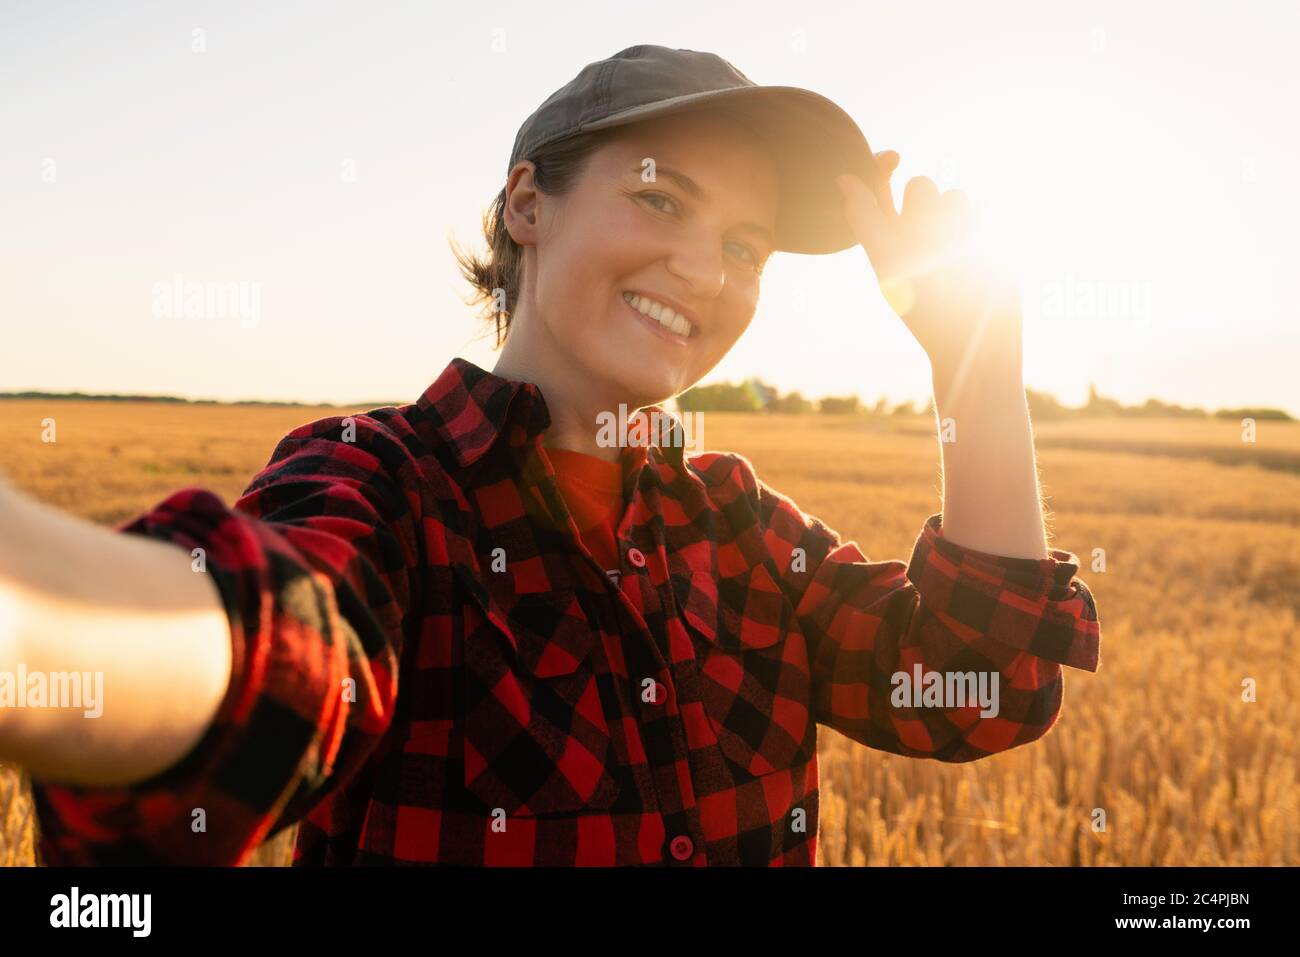 Woman farmer makes selfie on the background of a wheat field. Stock Photo